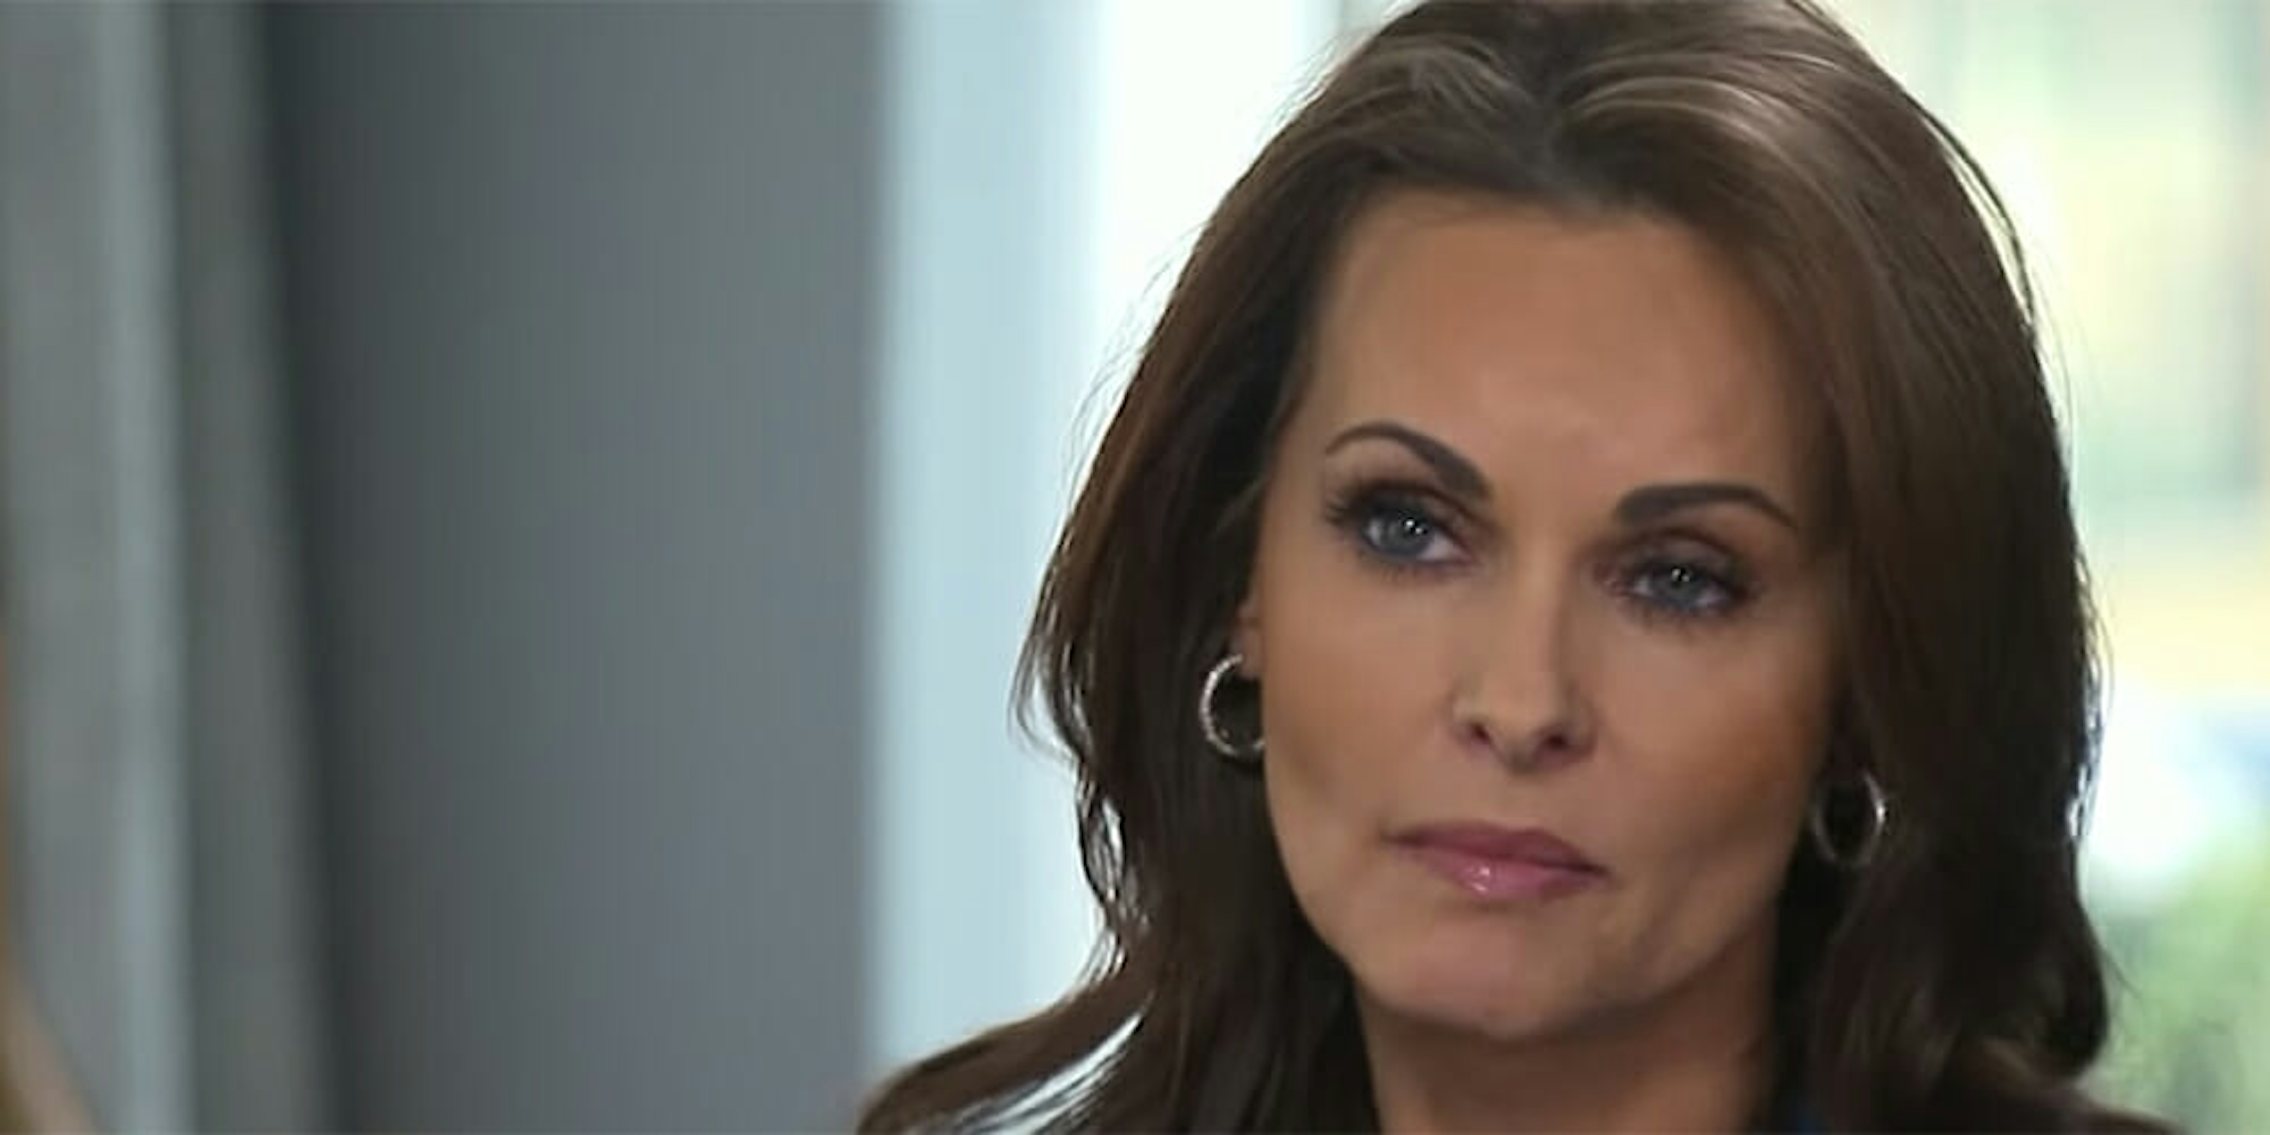 Former Playboy model Karen McDougal has reached an agreement to null a contract preventing her from speaking on her alleged affair with President Donald Trump.